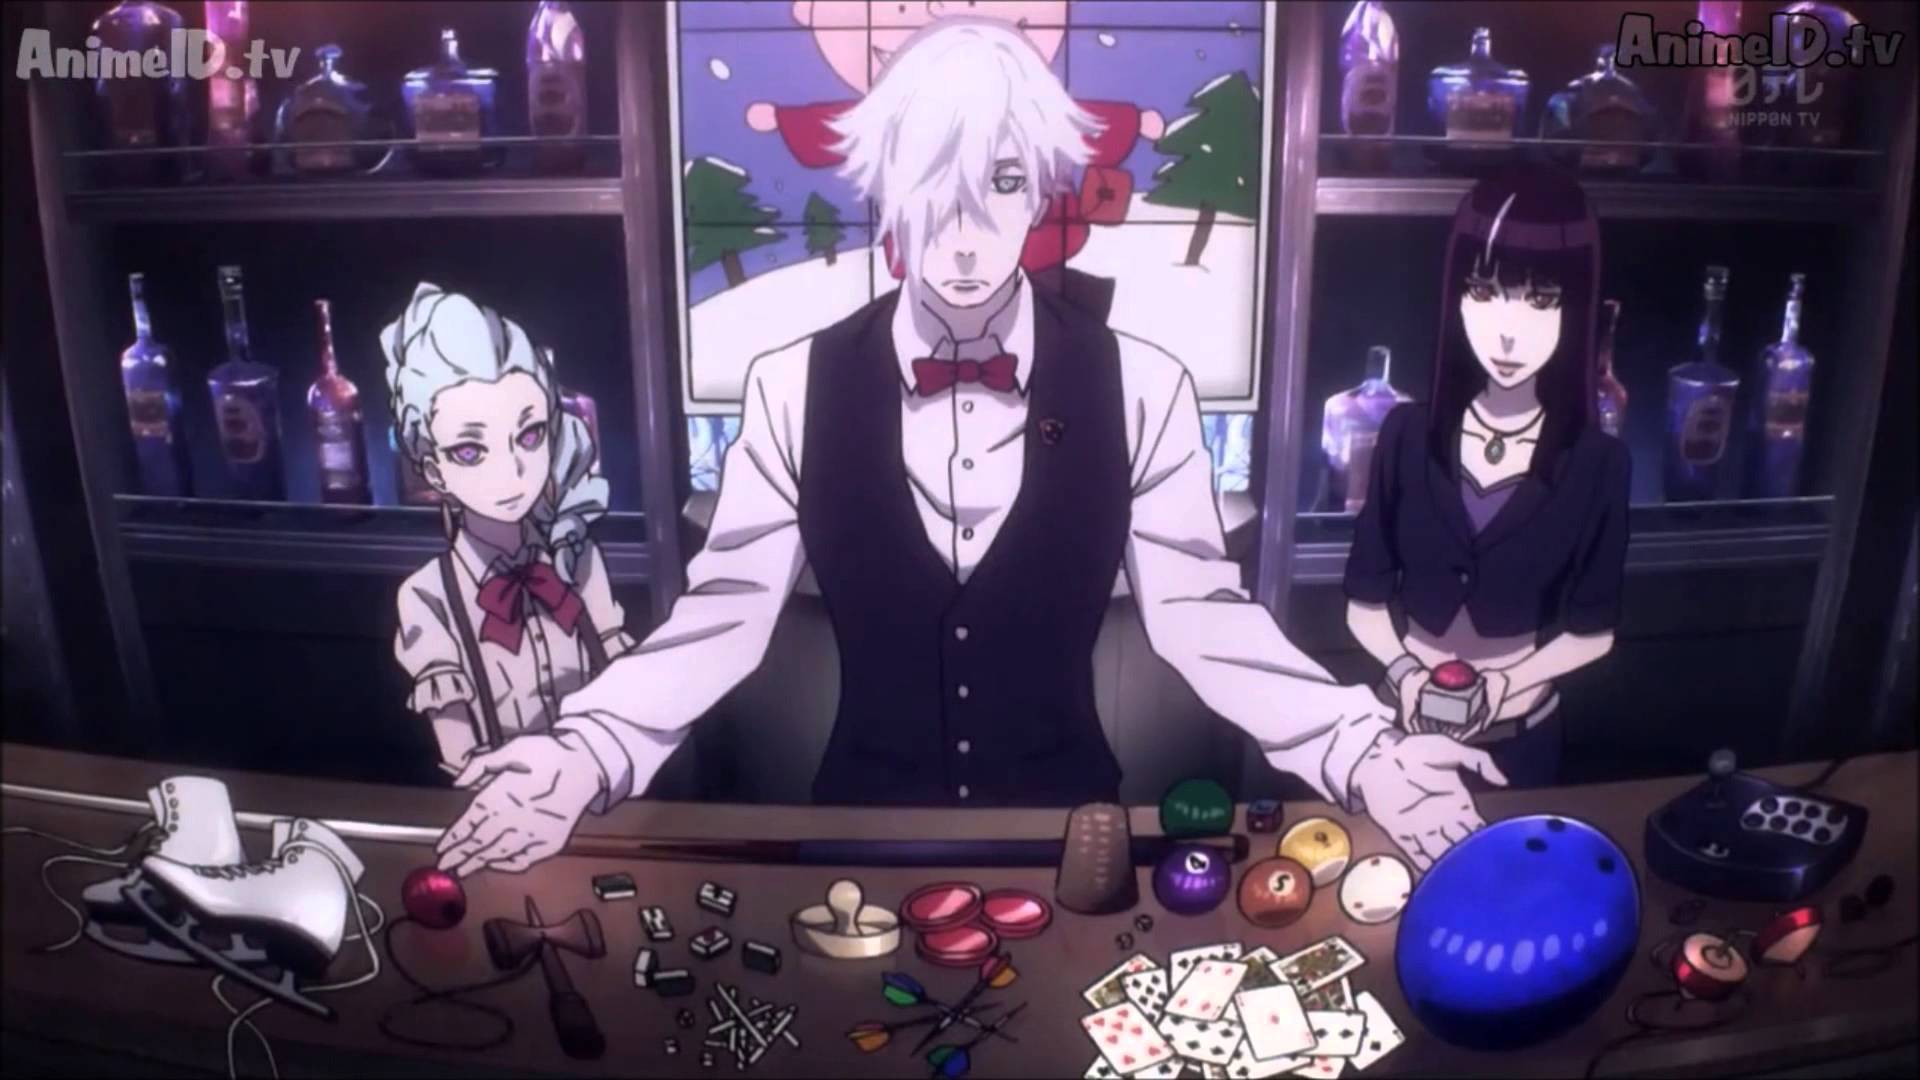 Arbiters, Nona and Decim, and human assistant Chiyuki with bar games displayed on the bar table in front of them.